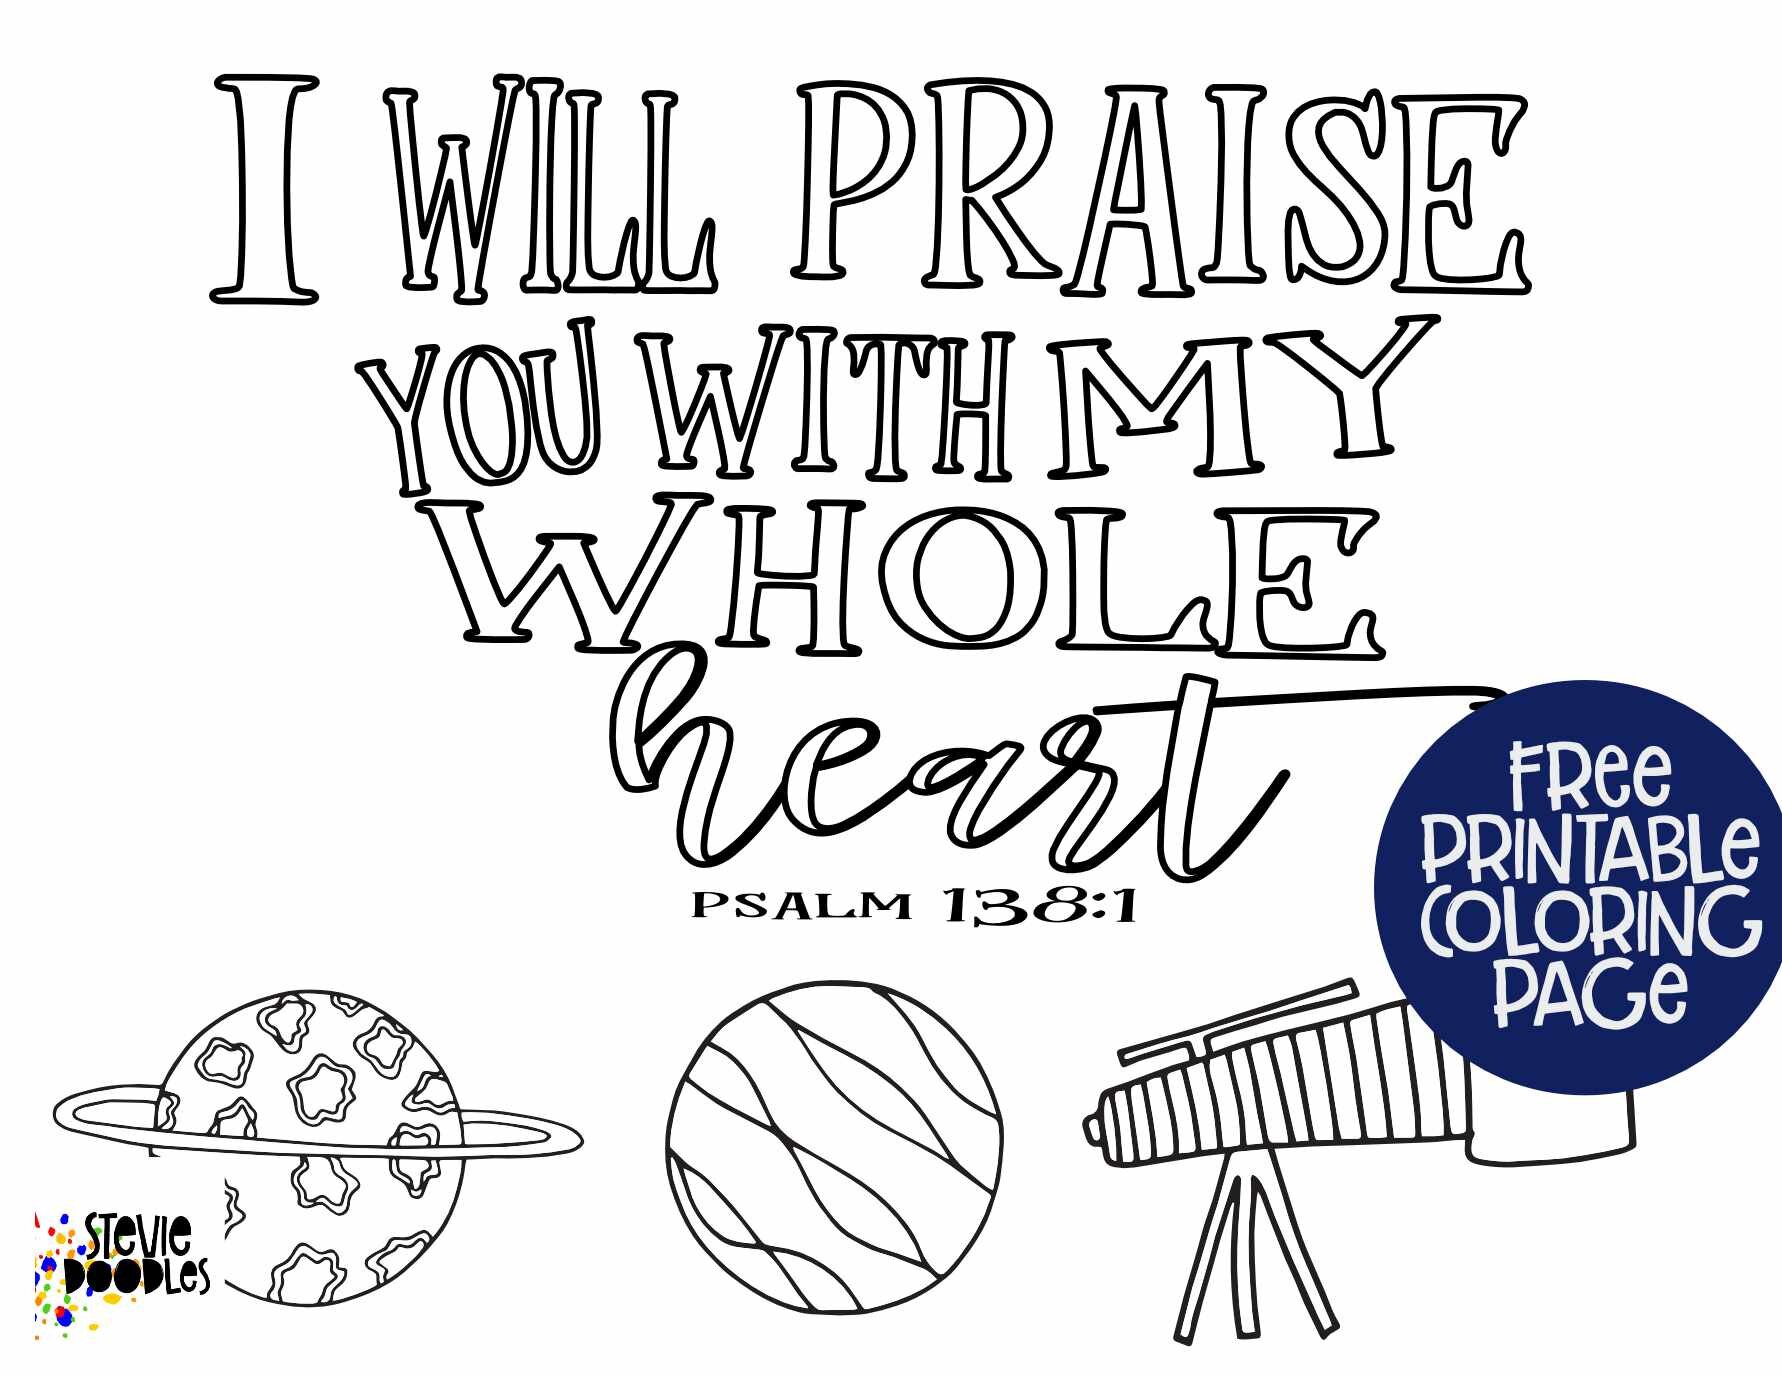 5 Free Printables! 4 Memory Verses on 1 page + each page as a separate printable coloring page I will praise You with my whole heart - Psalm 138:1